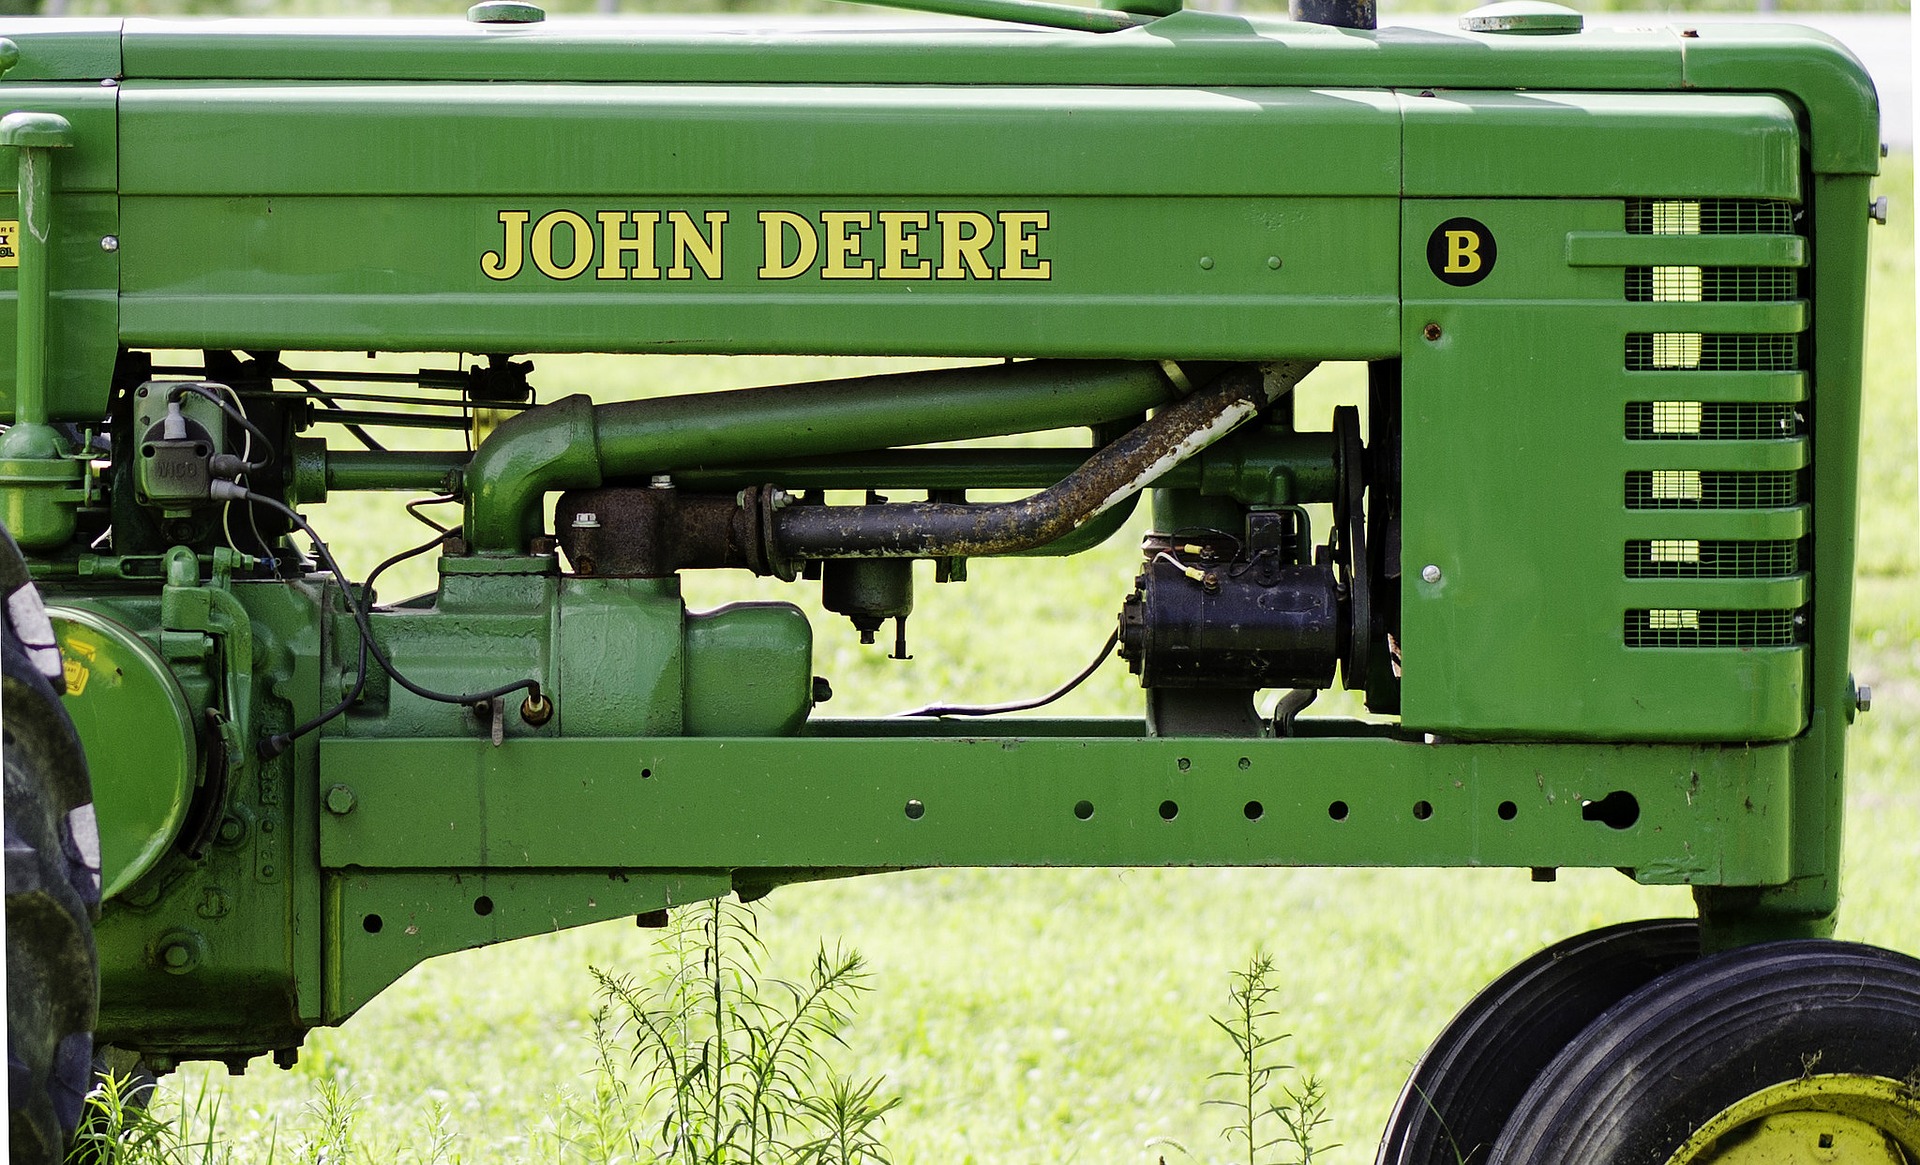 Close up view of a John Deere tractor